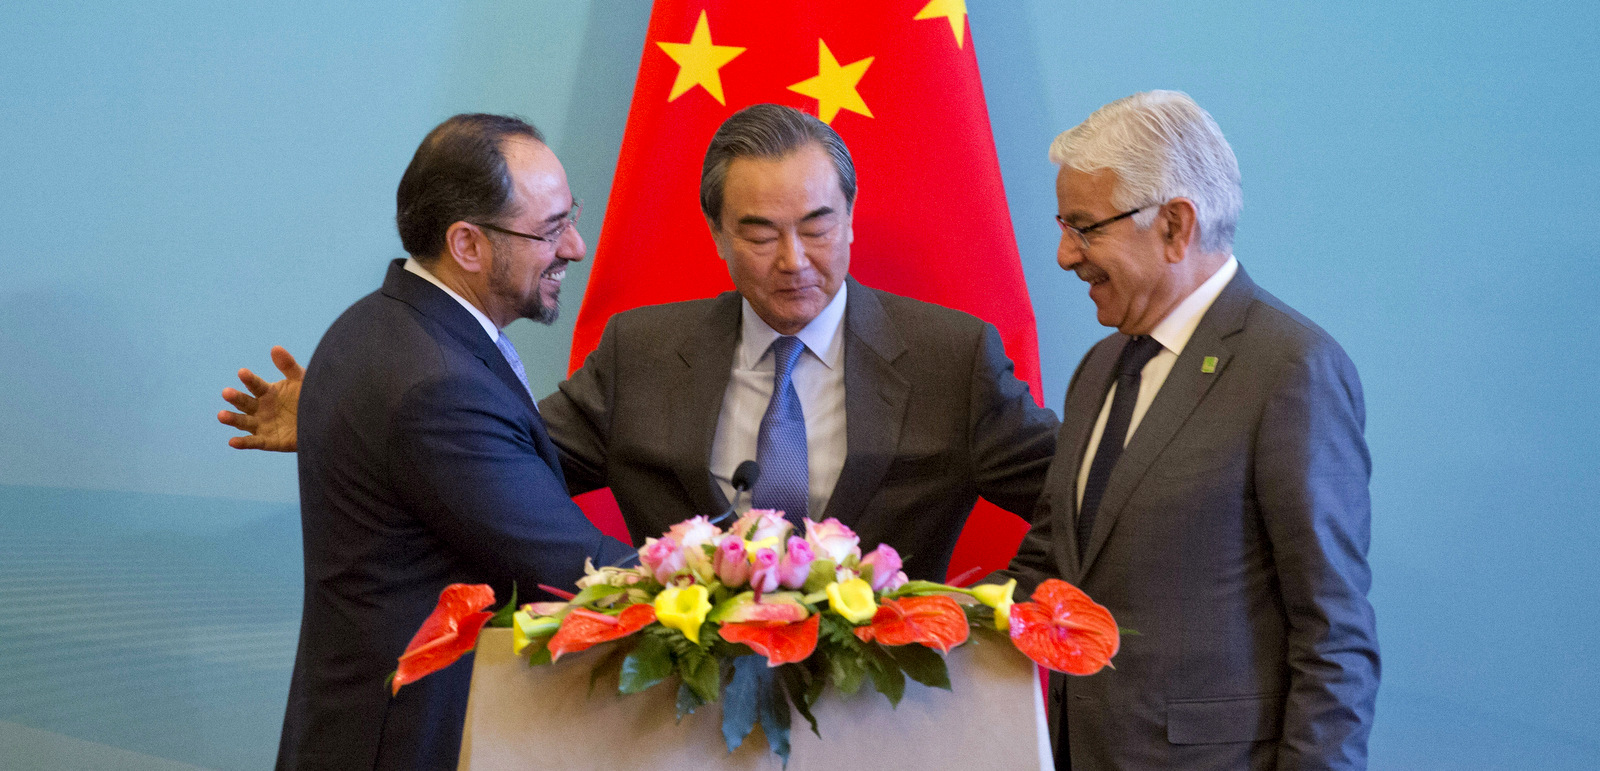 From left, Afghanistan Foreign Minister Salahuddin Rabbani, Chinese Foreign Minister Wang Yi and Pakistani Foreign Minister Khawaja Asif shake hands after a press conference for the 1st China-Afghanistan-Pakistan Foreign Ministers' Dialogue held in Beijing, China, Dec. 26, 2017. (AP/Ng Han Guan)